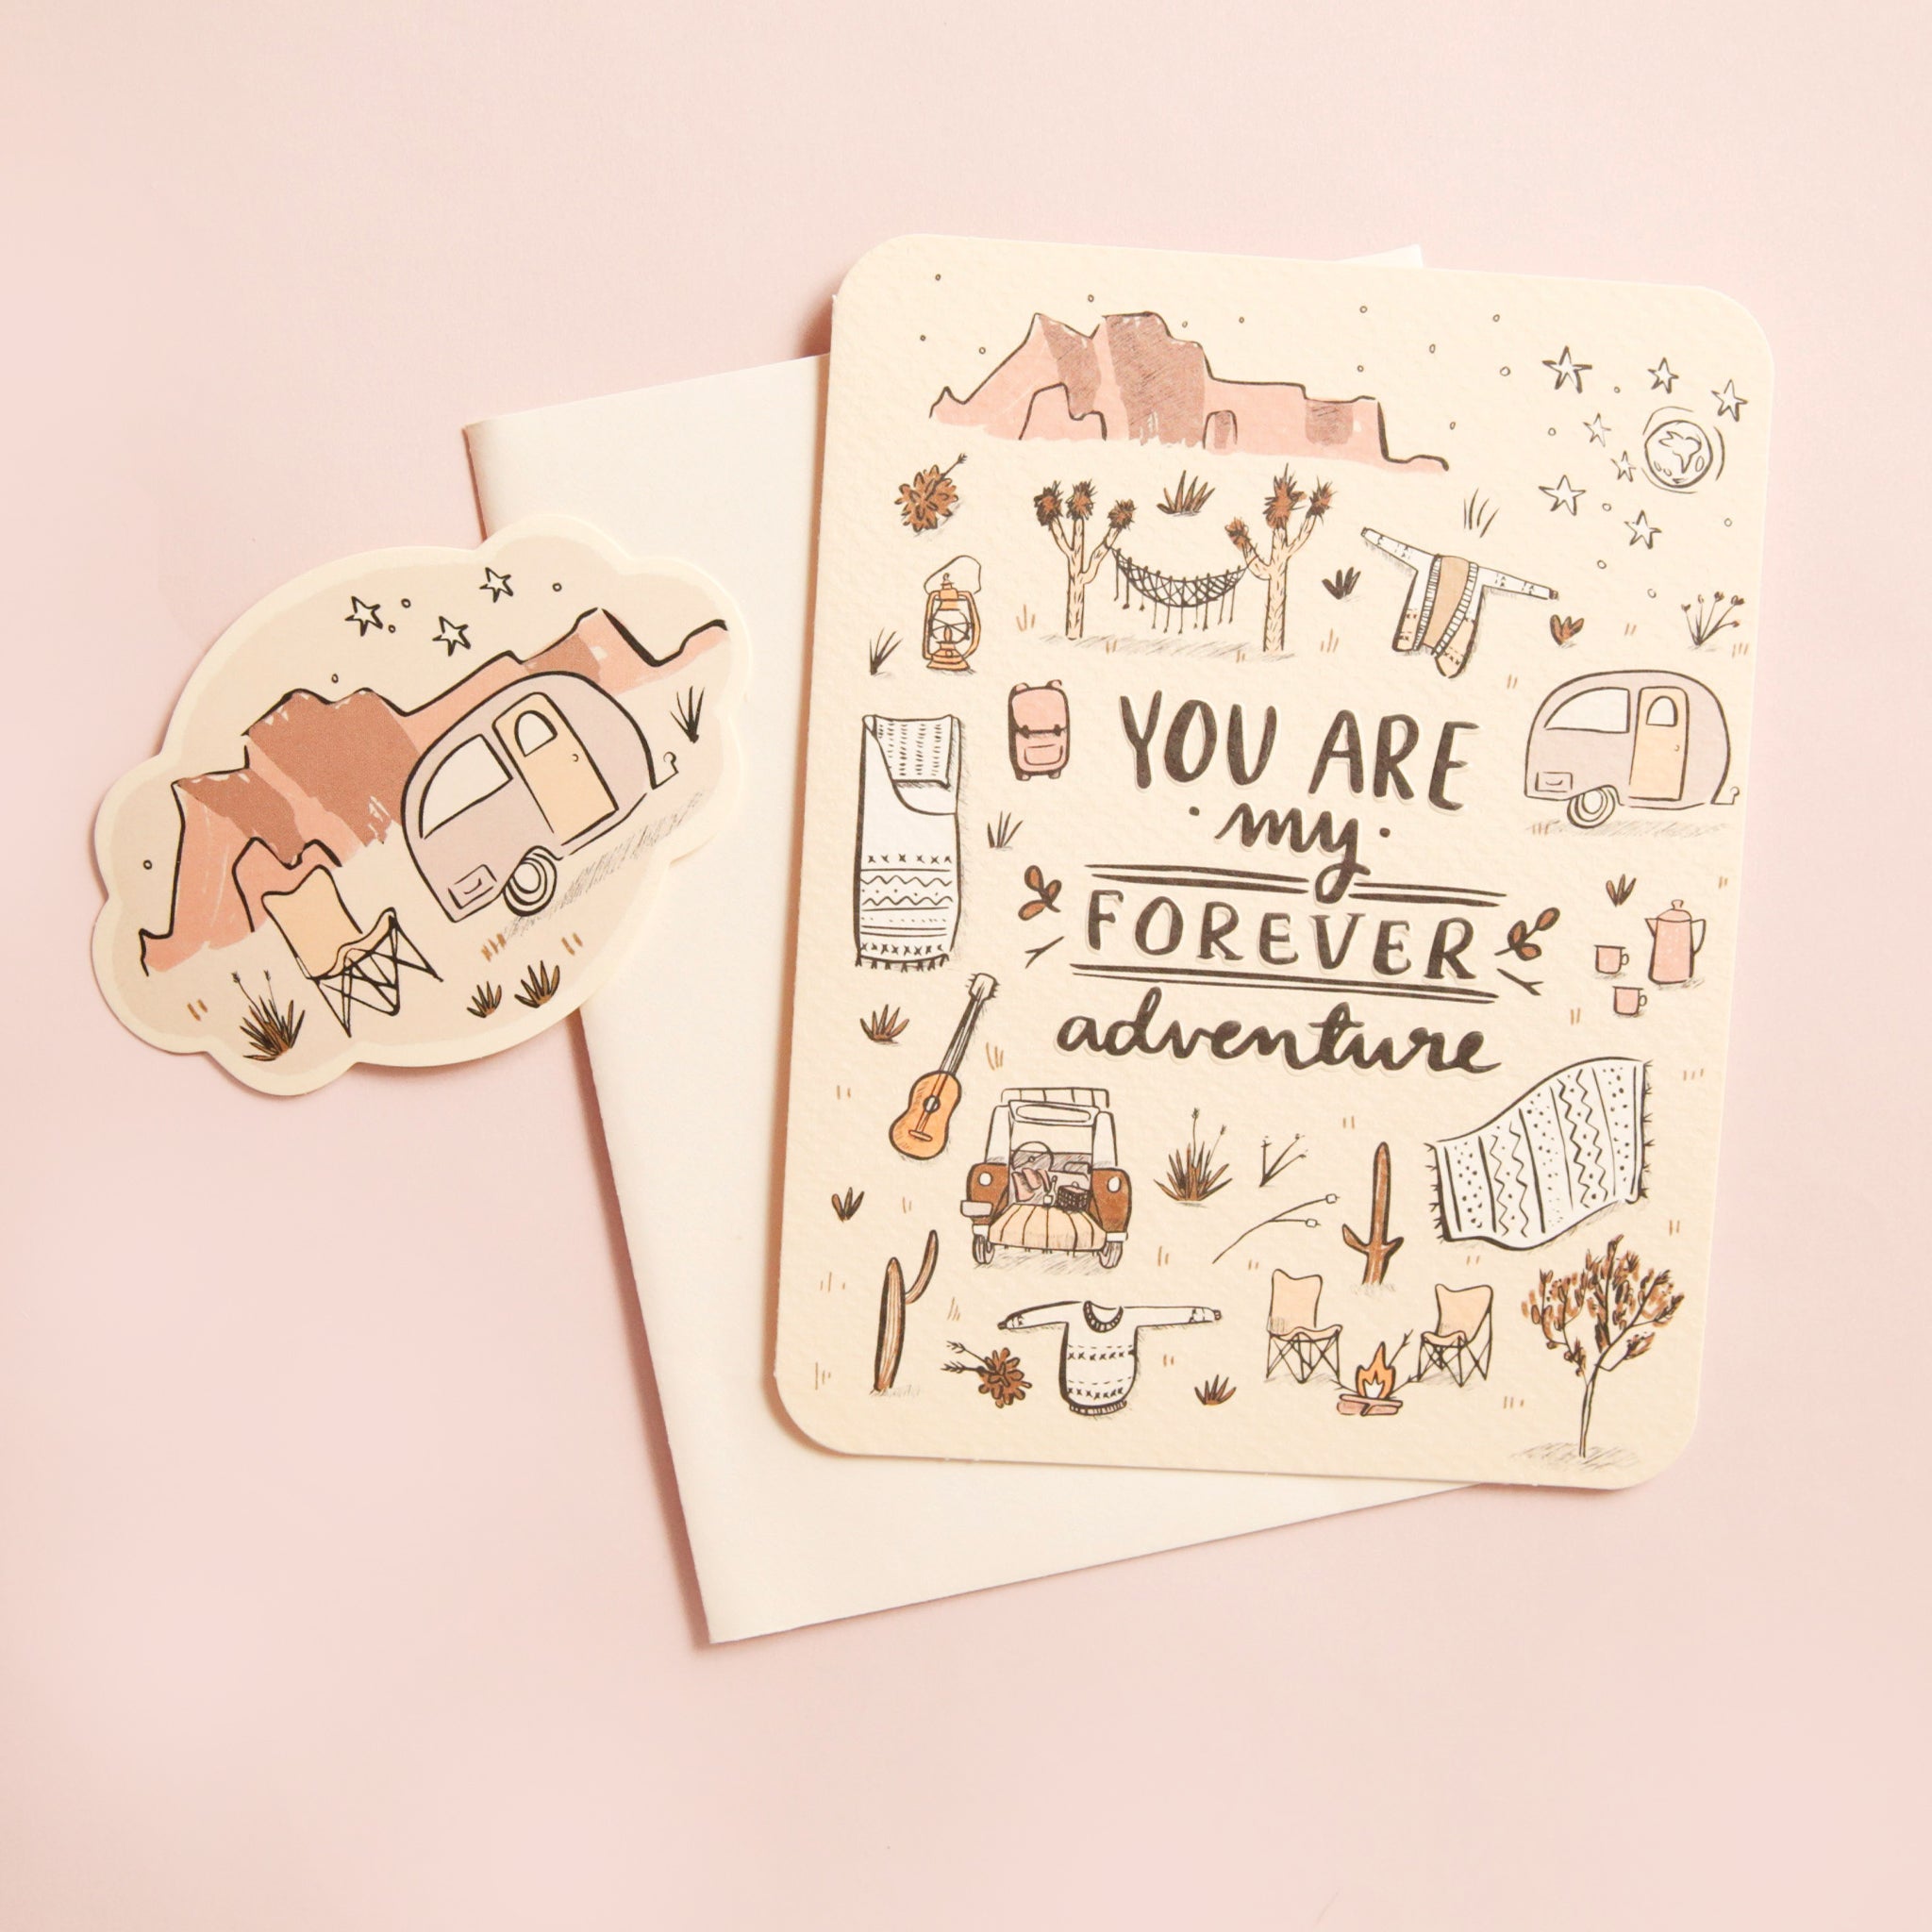 A cream colored card with a bunch of desert illustrations, including Joshua trees, cacti, stars, a camping trailer and more along with the words, "You Are My Forever Adventure". Also included is a white envelope and a small sticker with a camping chair and trailer against a desert mountain range.